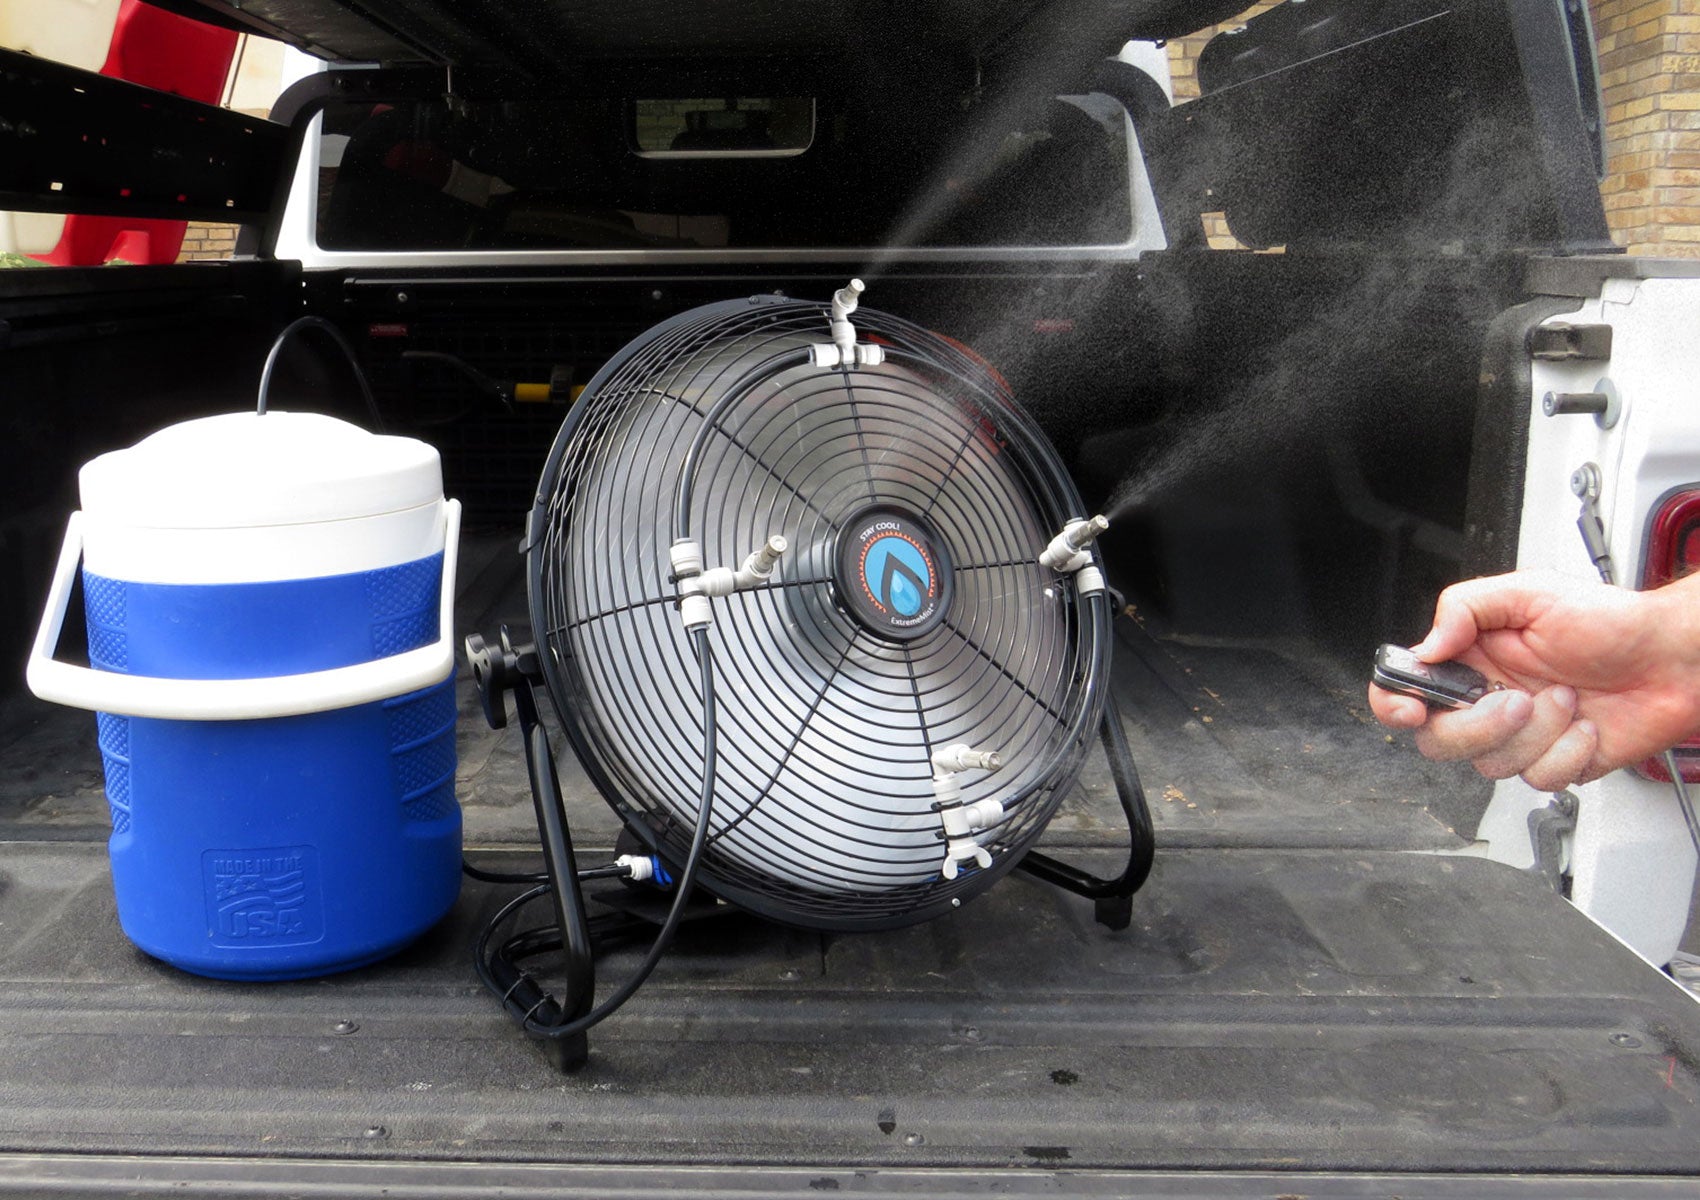 portable misting with 4 nozzles spraying mist in bed of truck with water cooler and wireless remote